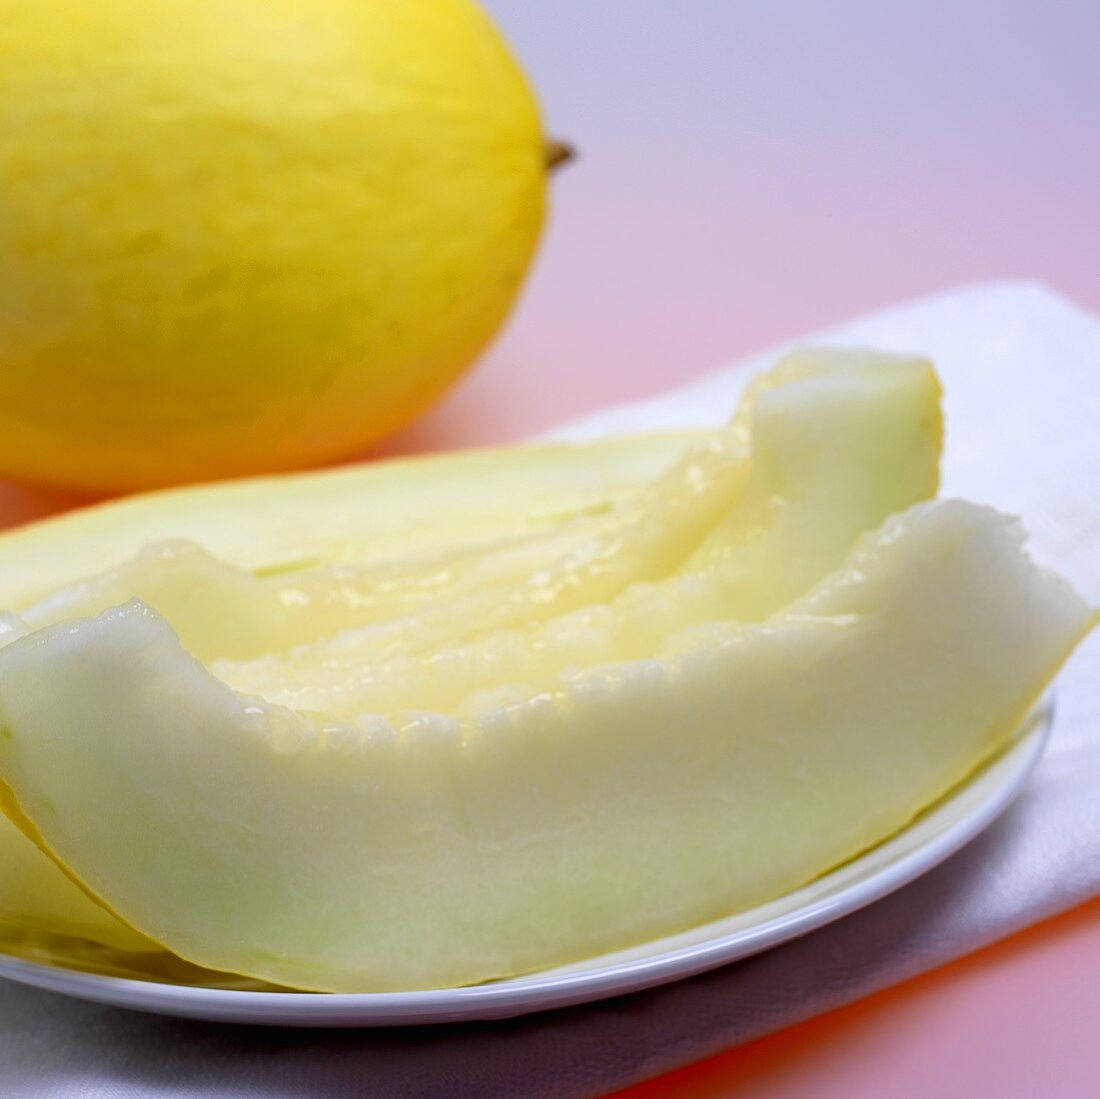 Whole honeydew melon and slices of melon